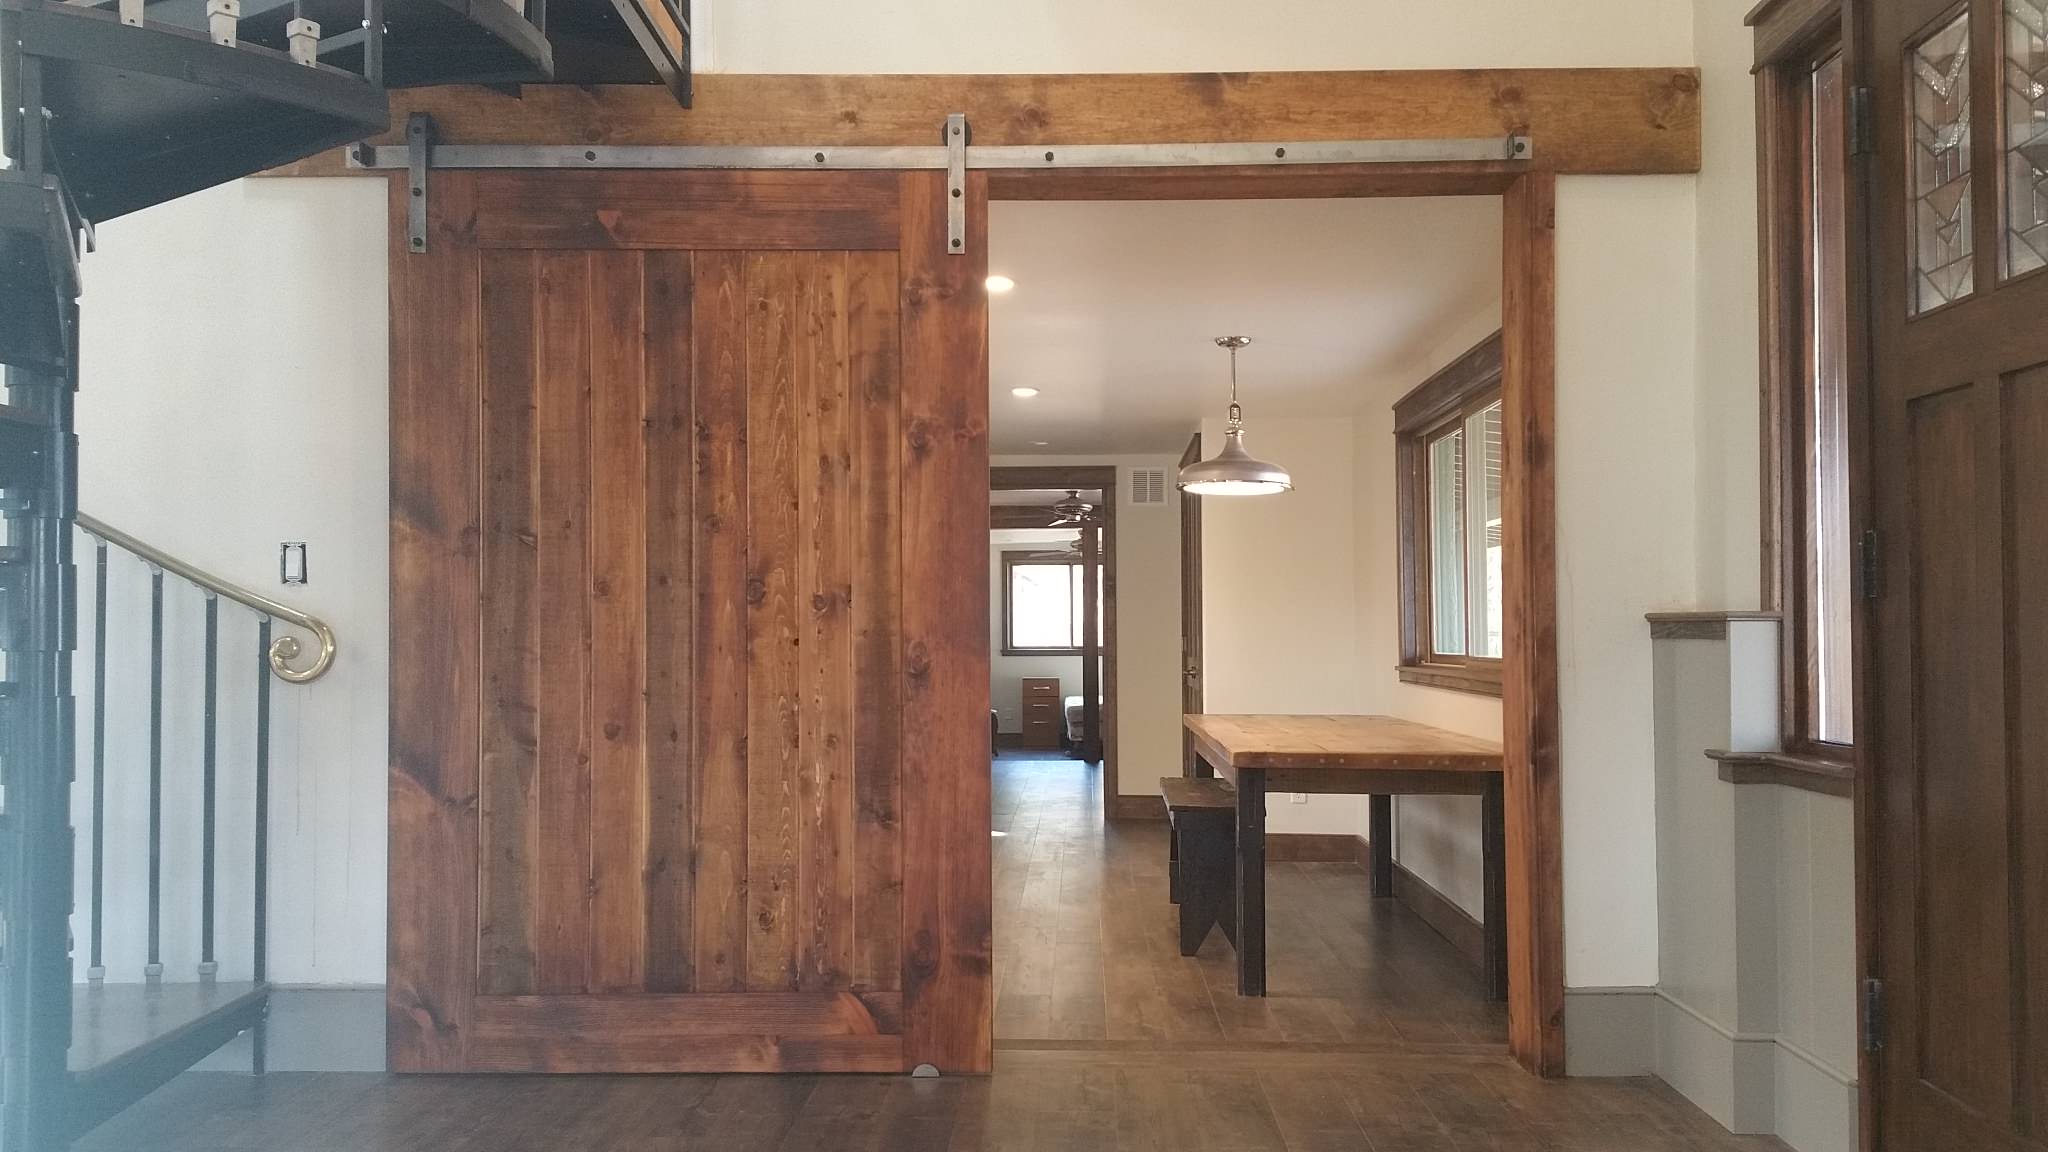 Converted tractor barn - Page Springs AZ